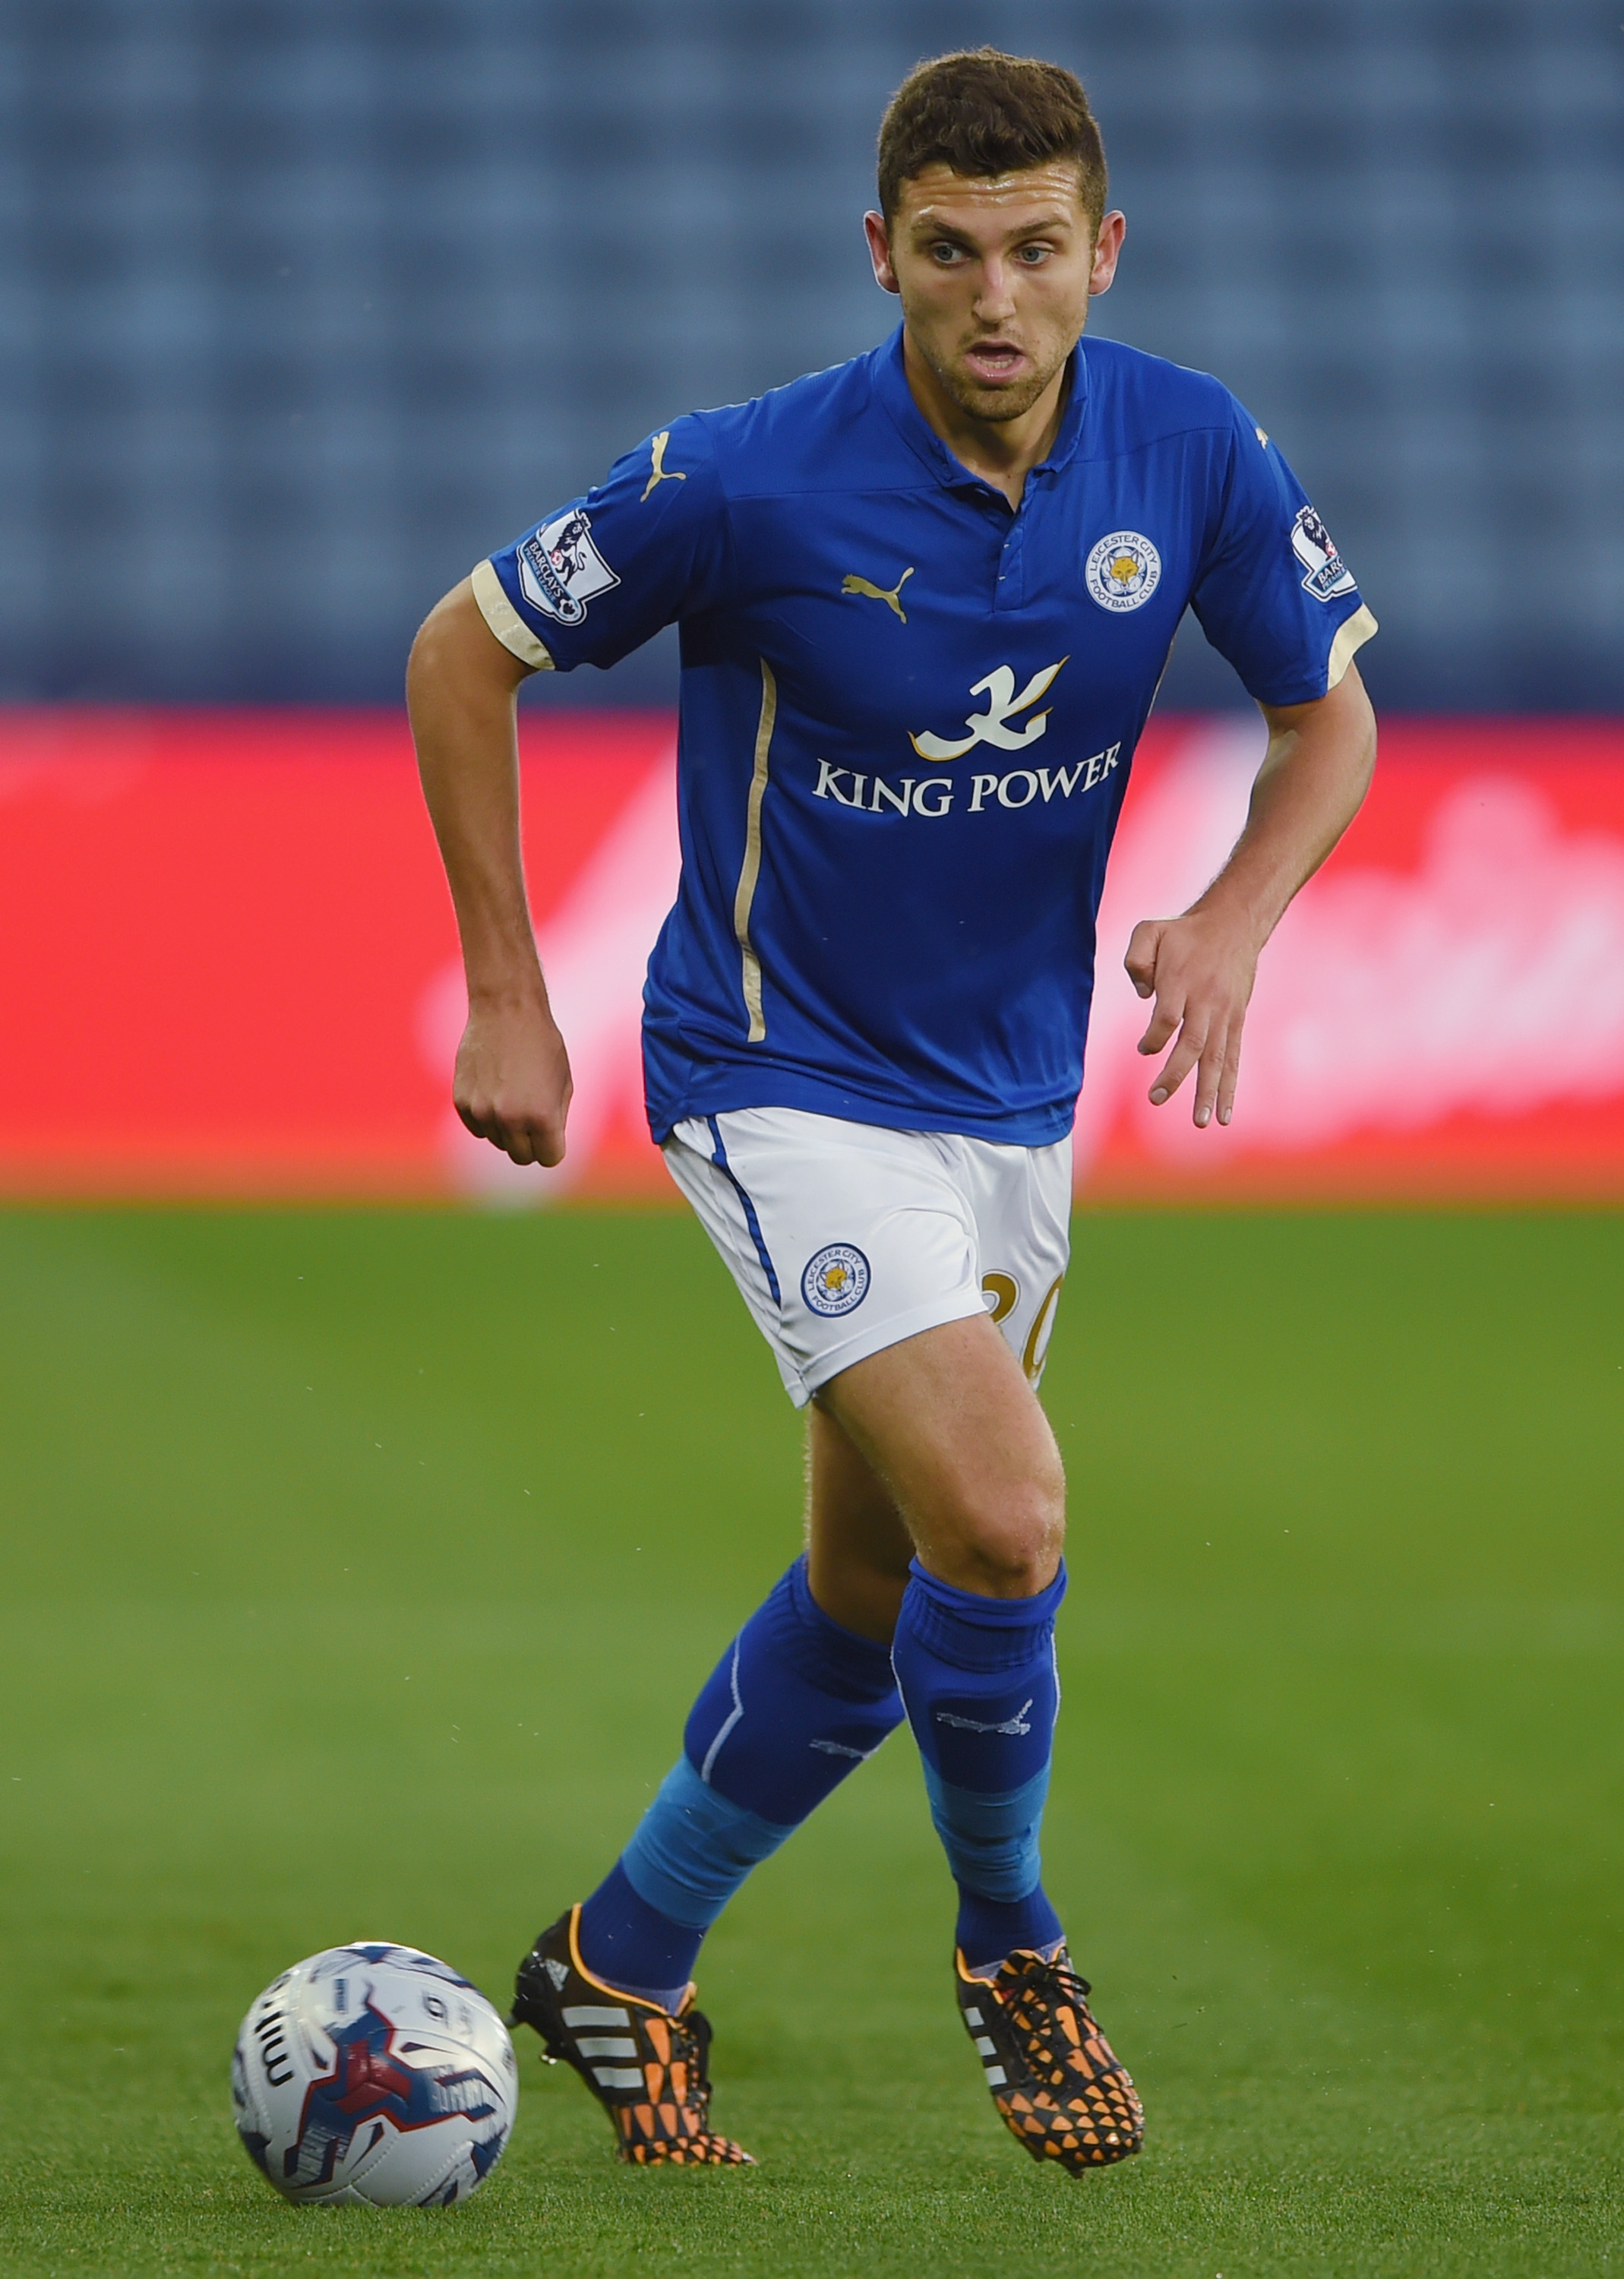 James Pearson of Leicester in action during the Capital One Cup second round match between Leicester City and Shrewsbury Town at The King Power Stadium on Aug. 26, 2014 in Leicester, England.